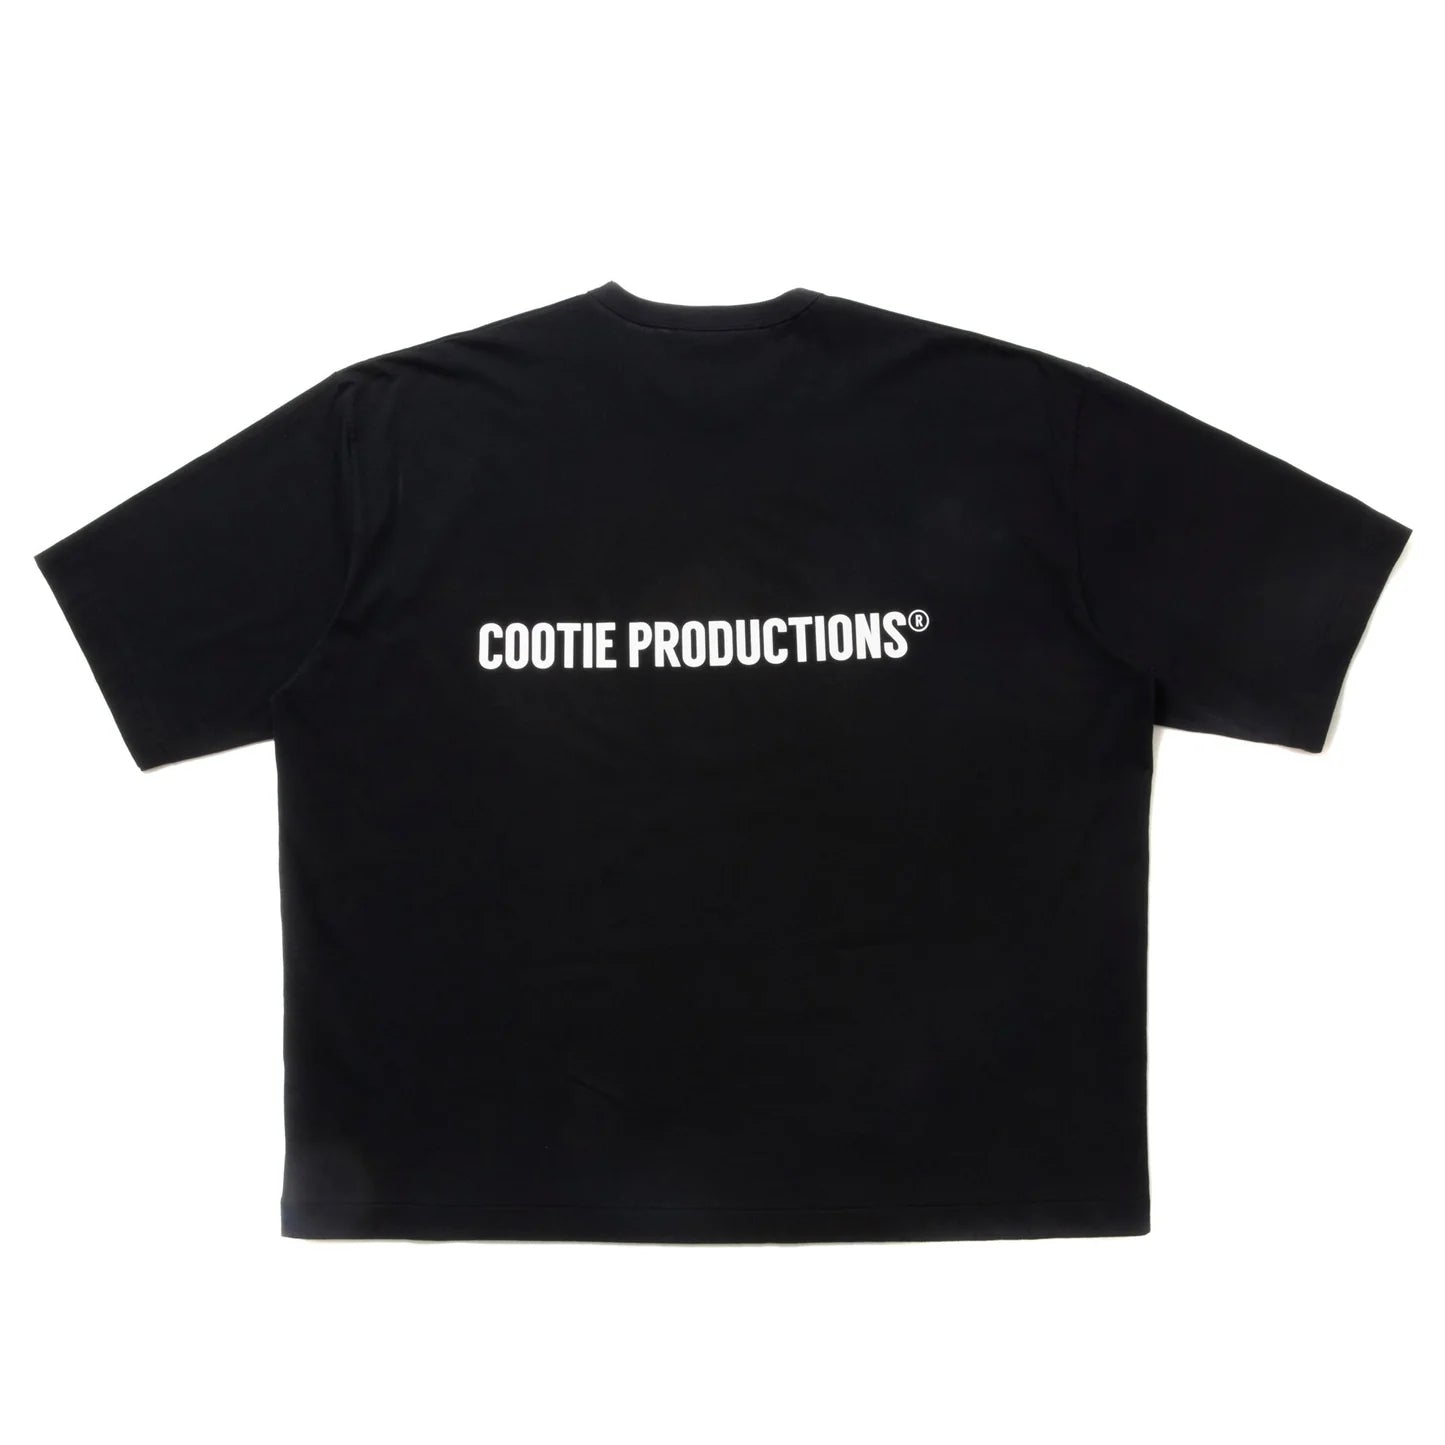 COOTIE PRODUCTIONS PRINT OVERSIZED S/S TEE